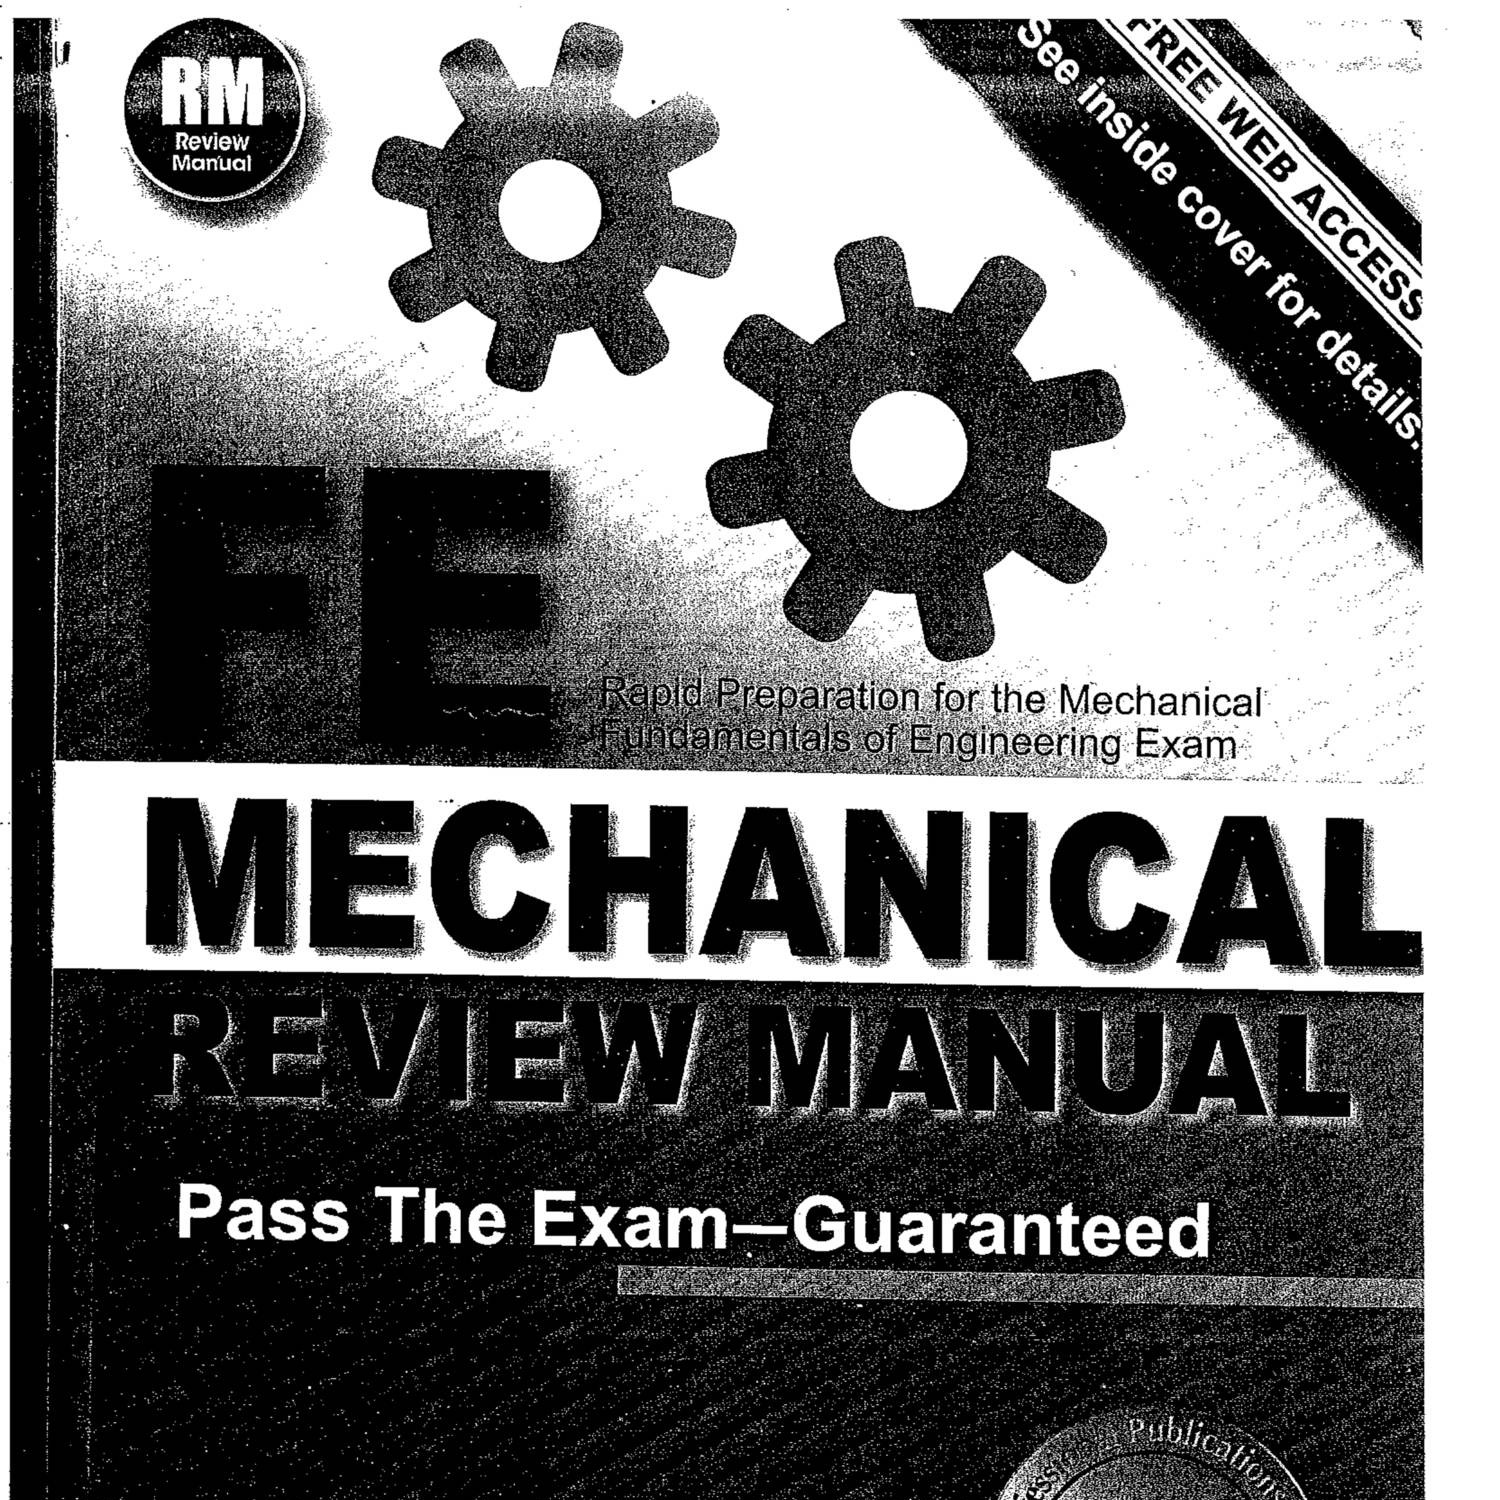 FE Mechanical Review Manual.pdf | DocDroid